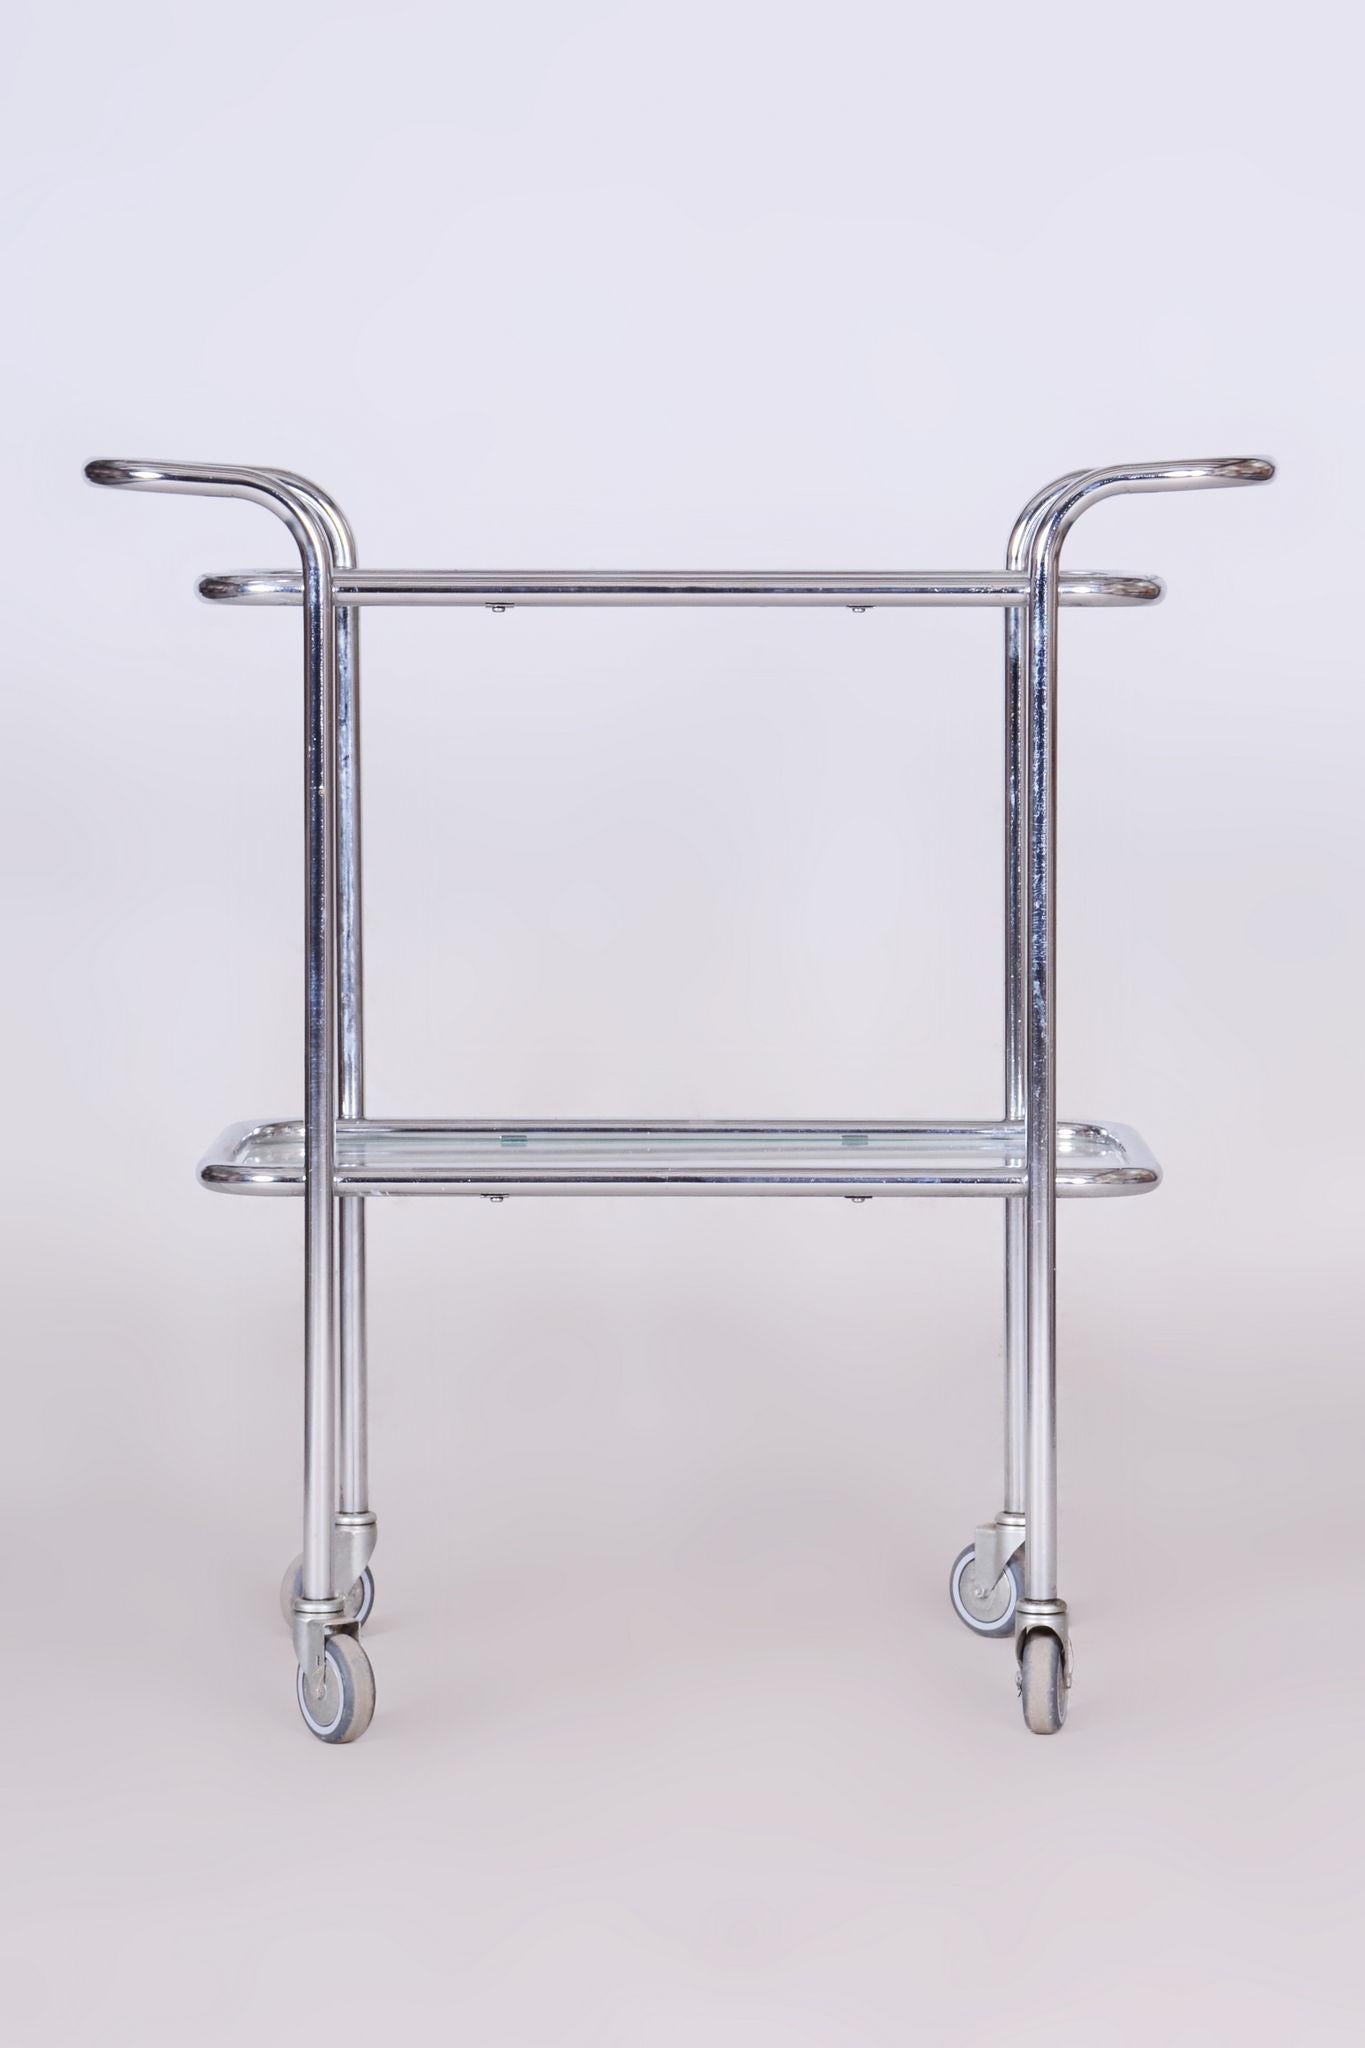 Original Bauhaus Trolley, Chrome-Plated Steel, Glass, Germany, 1940s For Sale 2